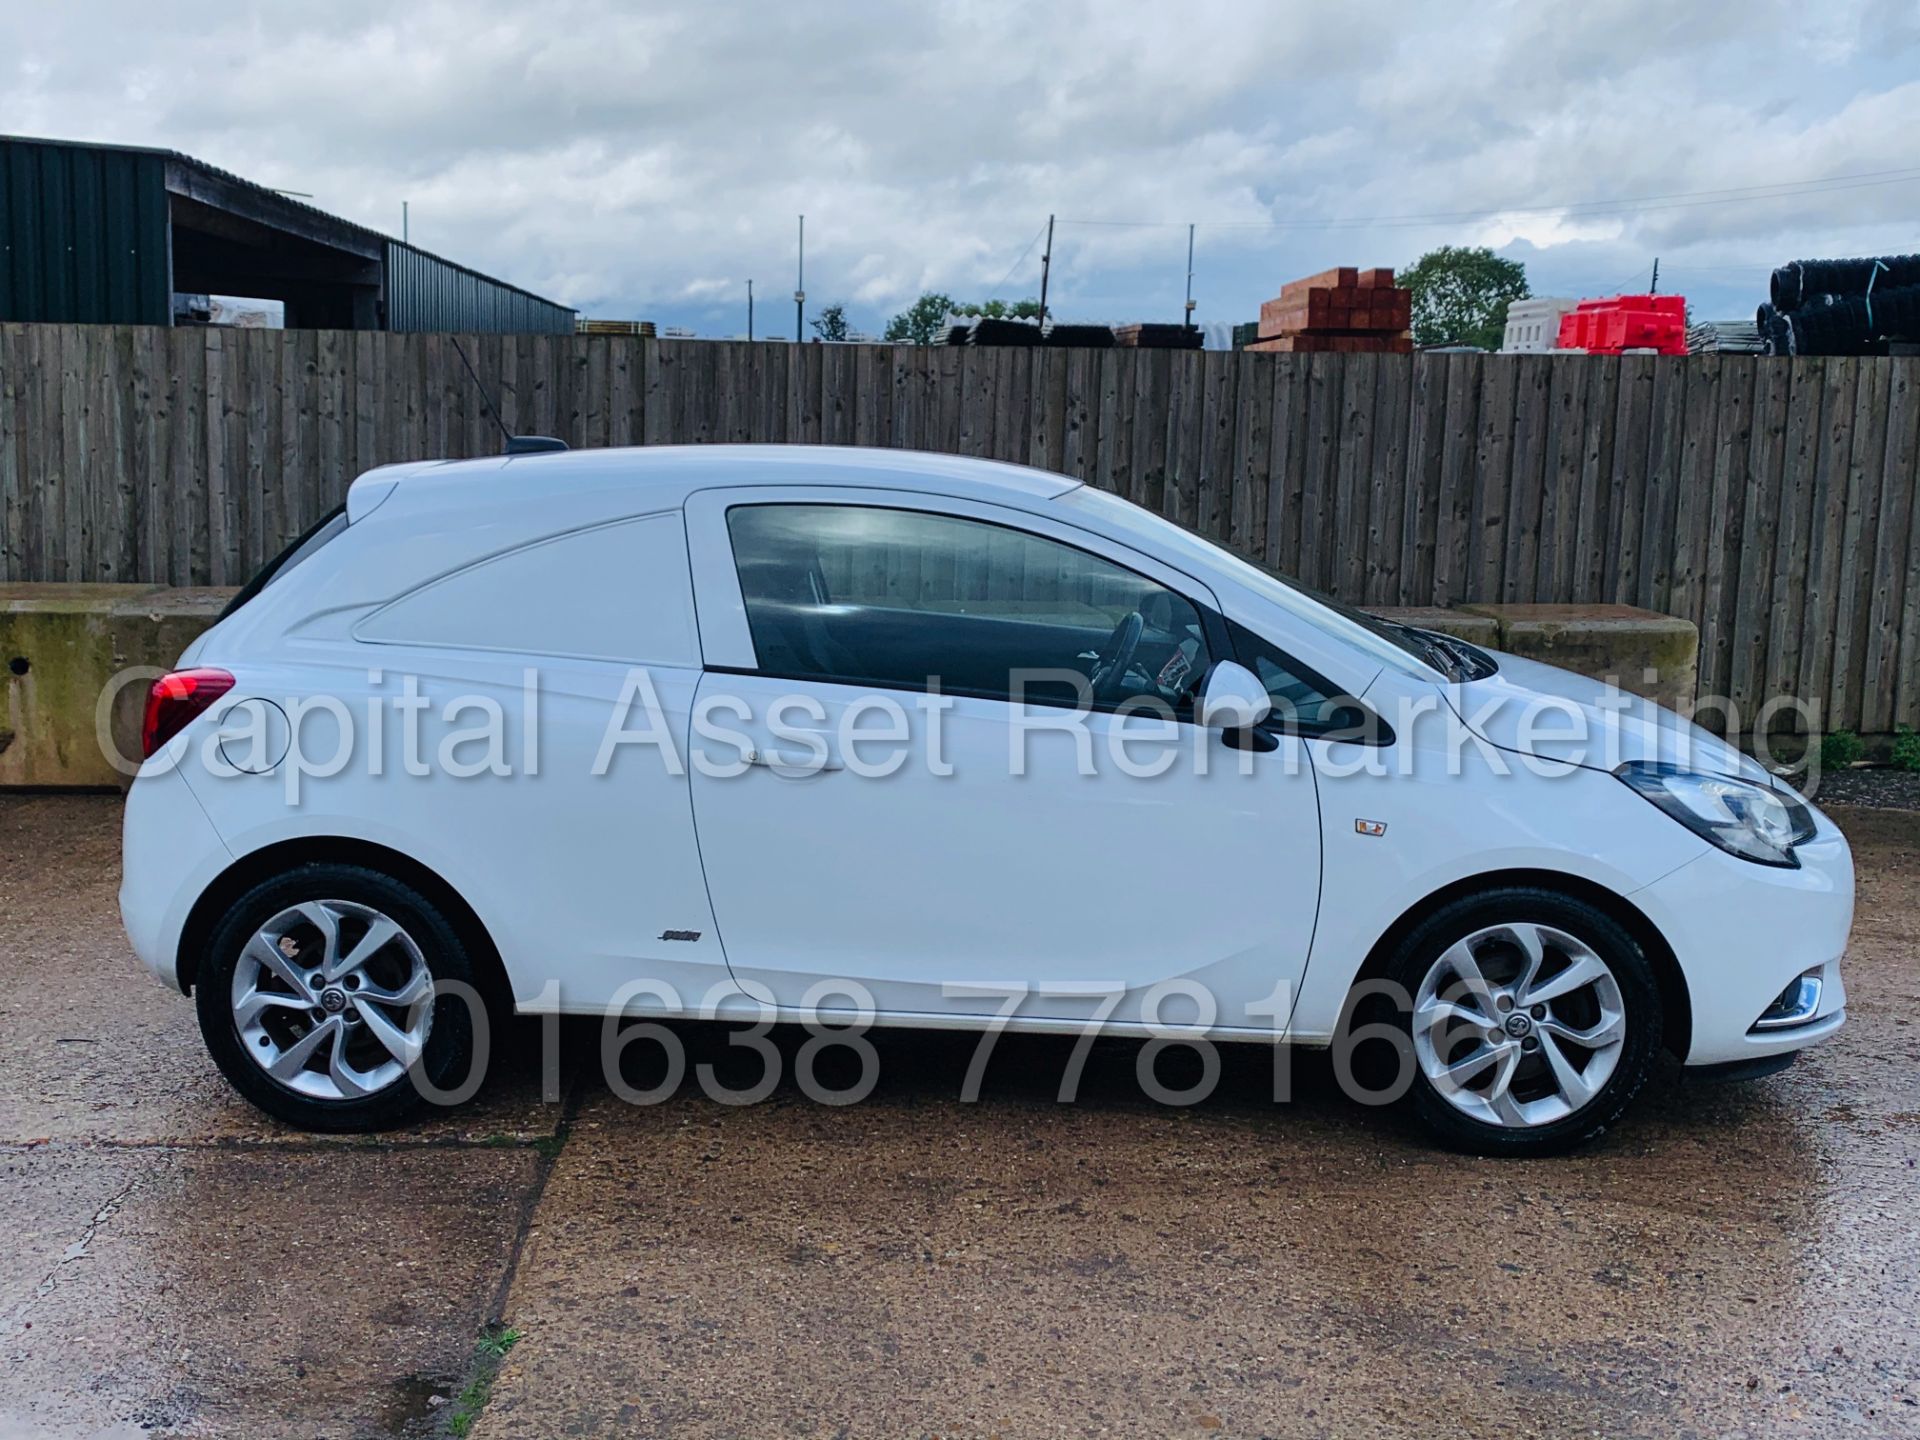 (On Sale) VAUXHALL CORSA *SPORTIVE - VAN* (2016 - NEW MODEL) '95 BHP - 6 SPEED' *A/C* (1 OWNER) - Image 14 of 43